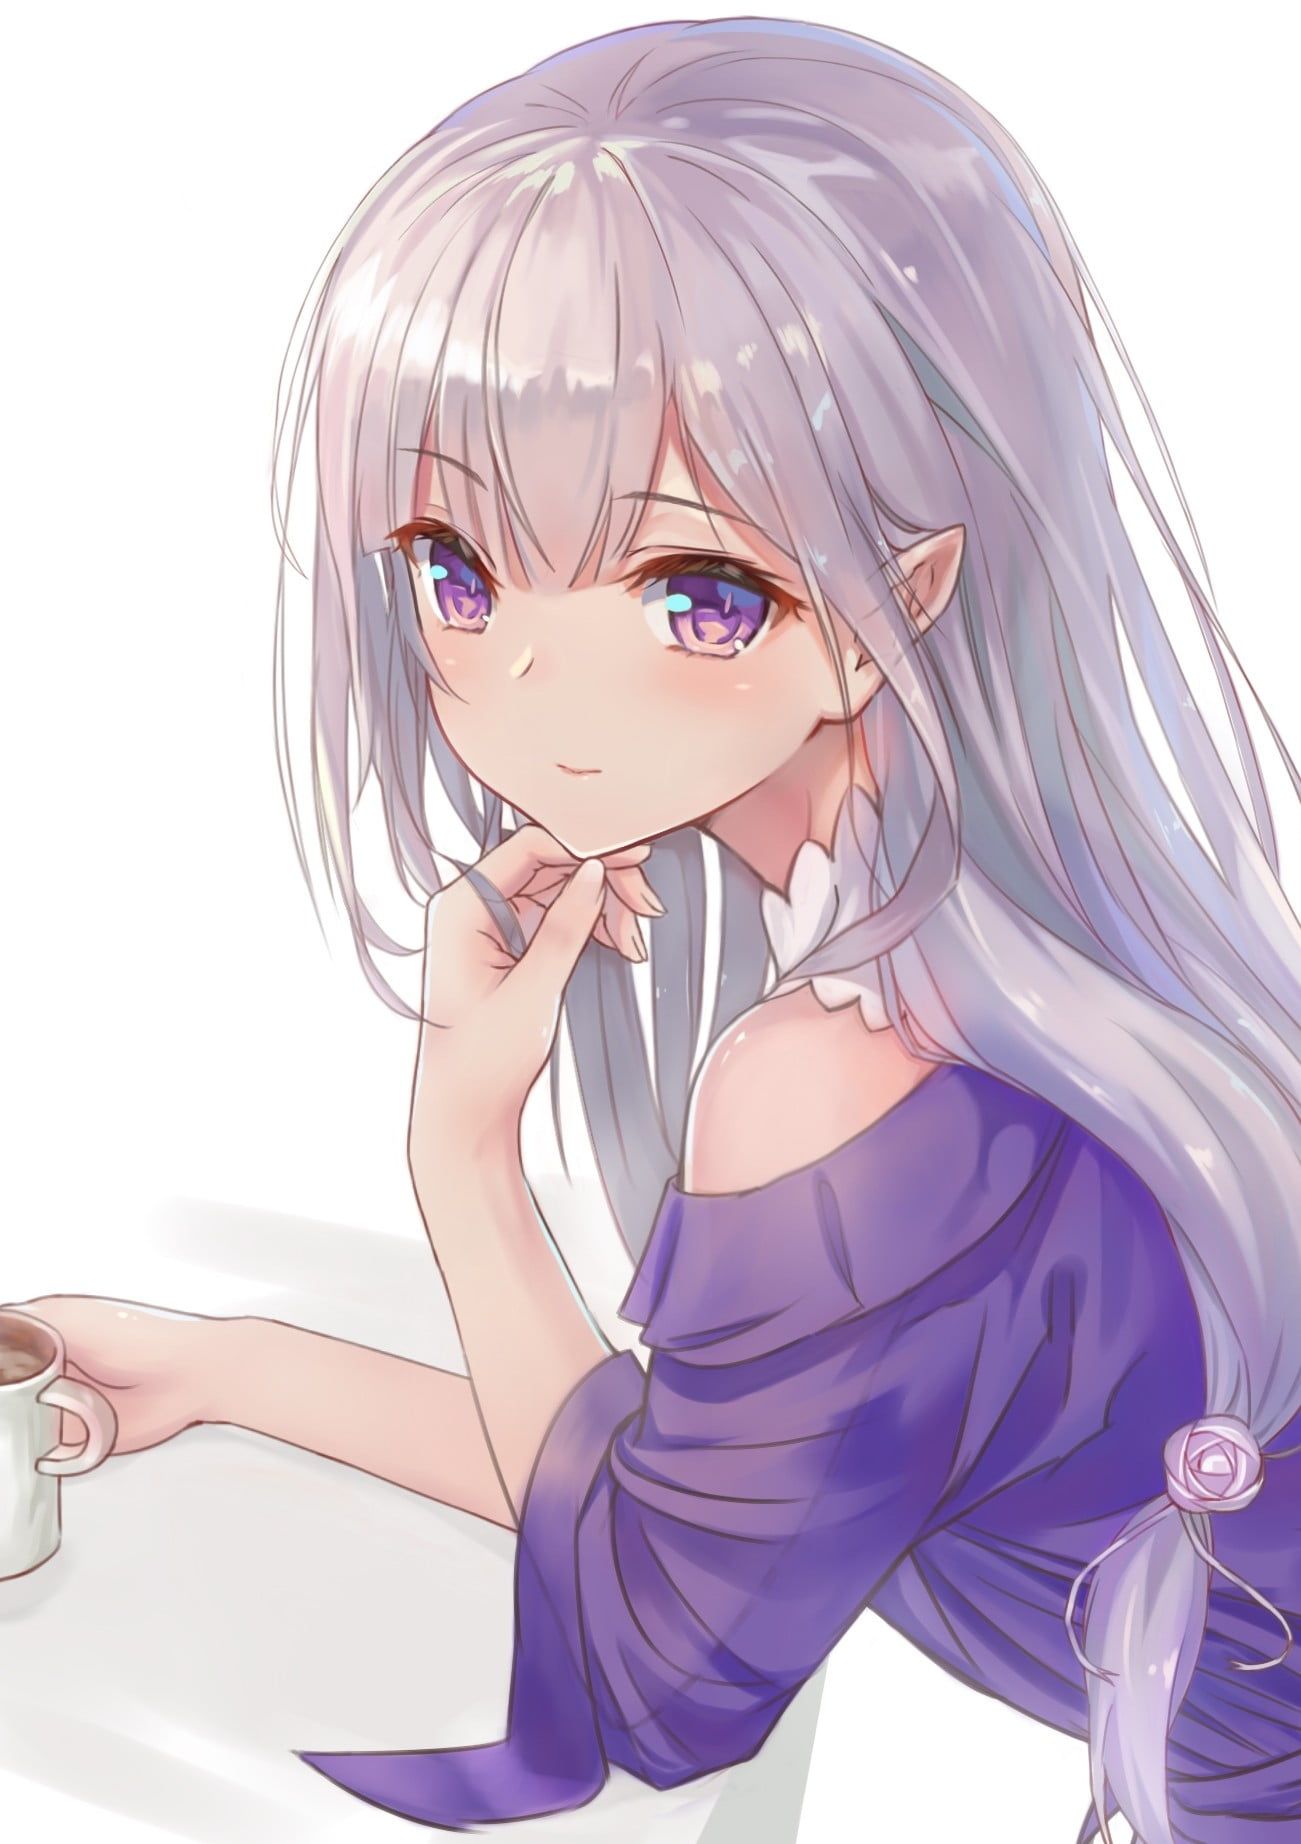 Girl with gray hair wearing purple tops anime character illustration HD wallpaper